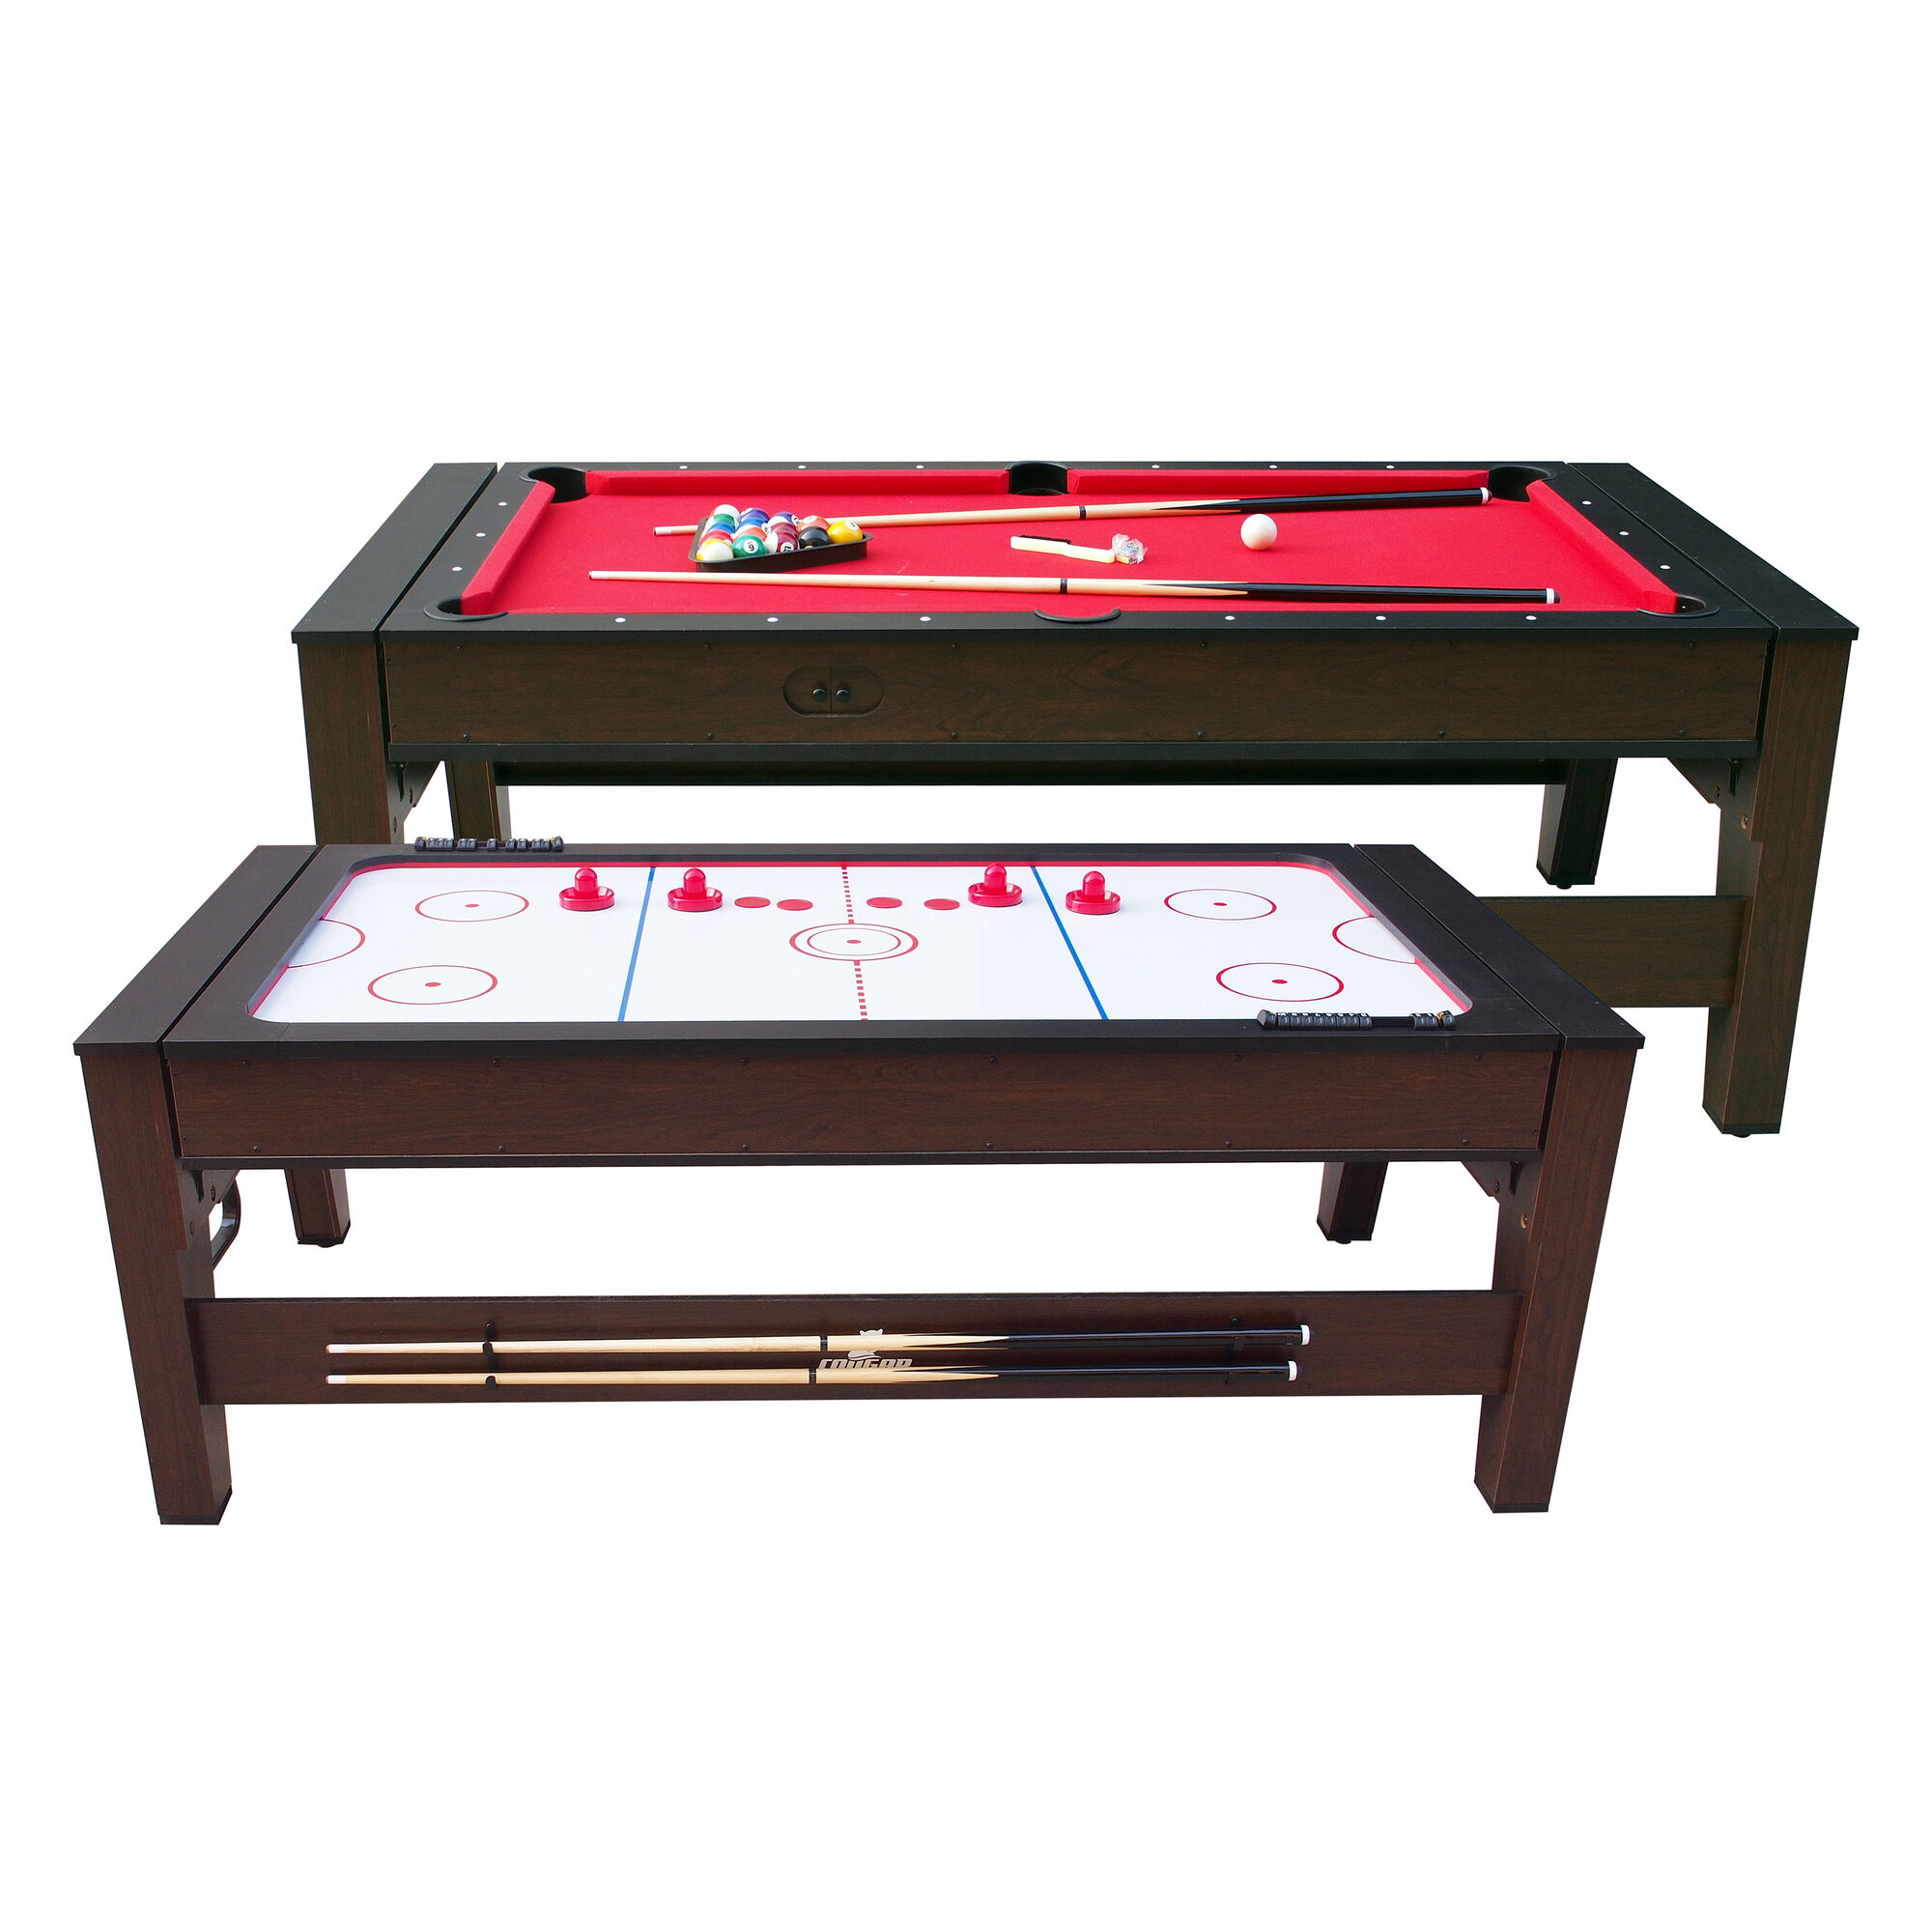 productfoto Cougar Reverso Pool & Airhockey Table